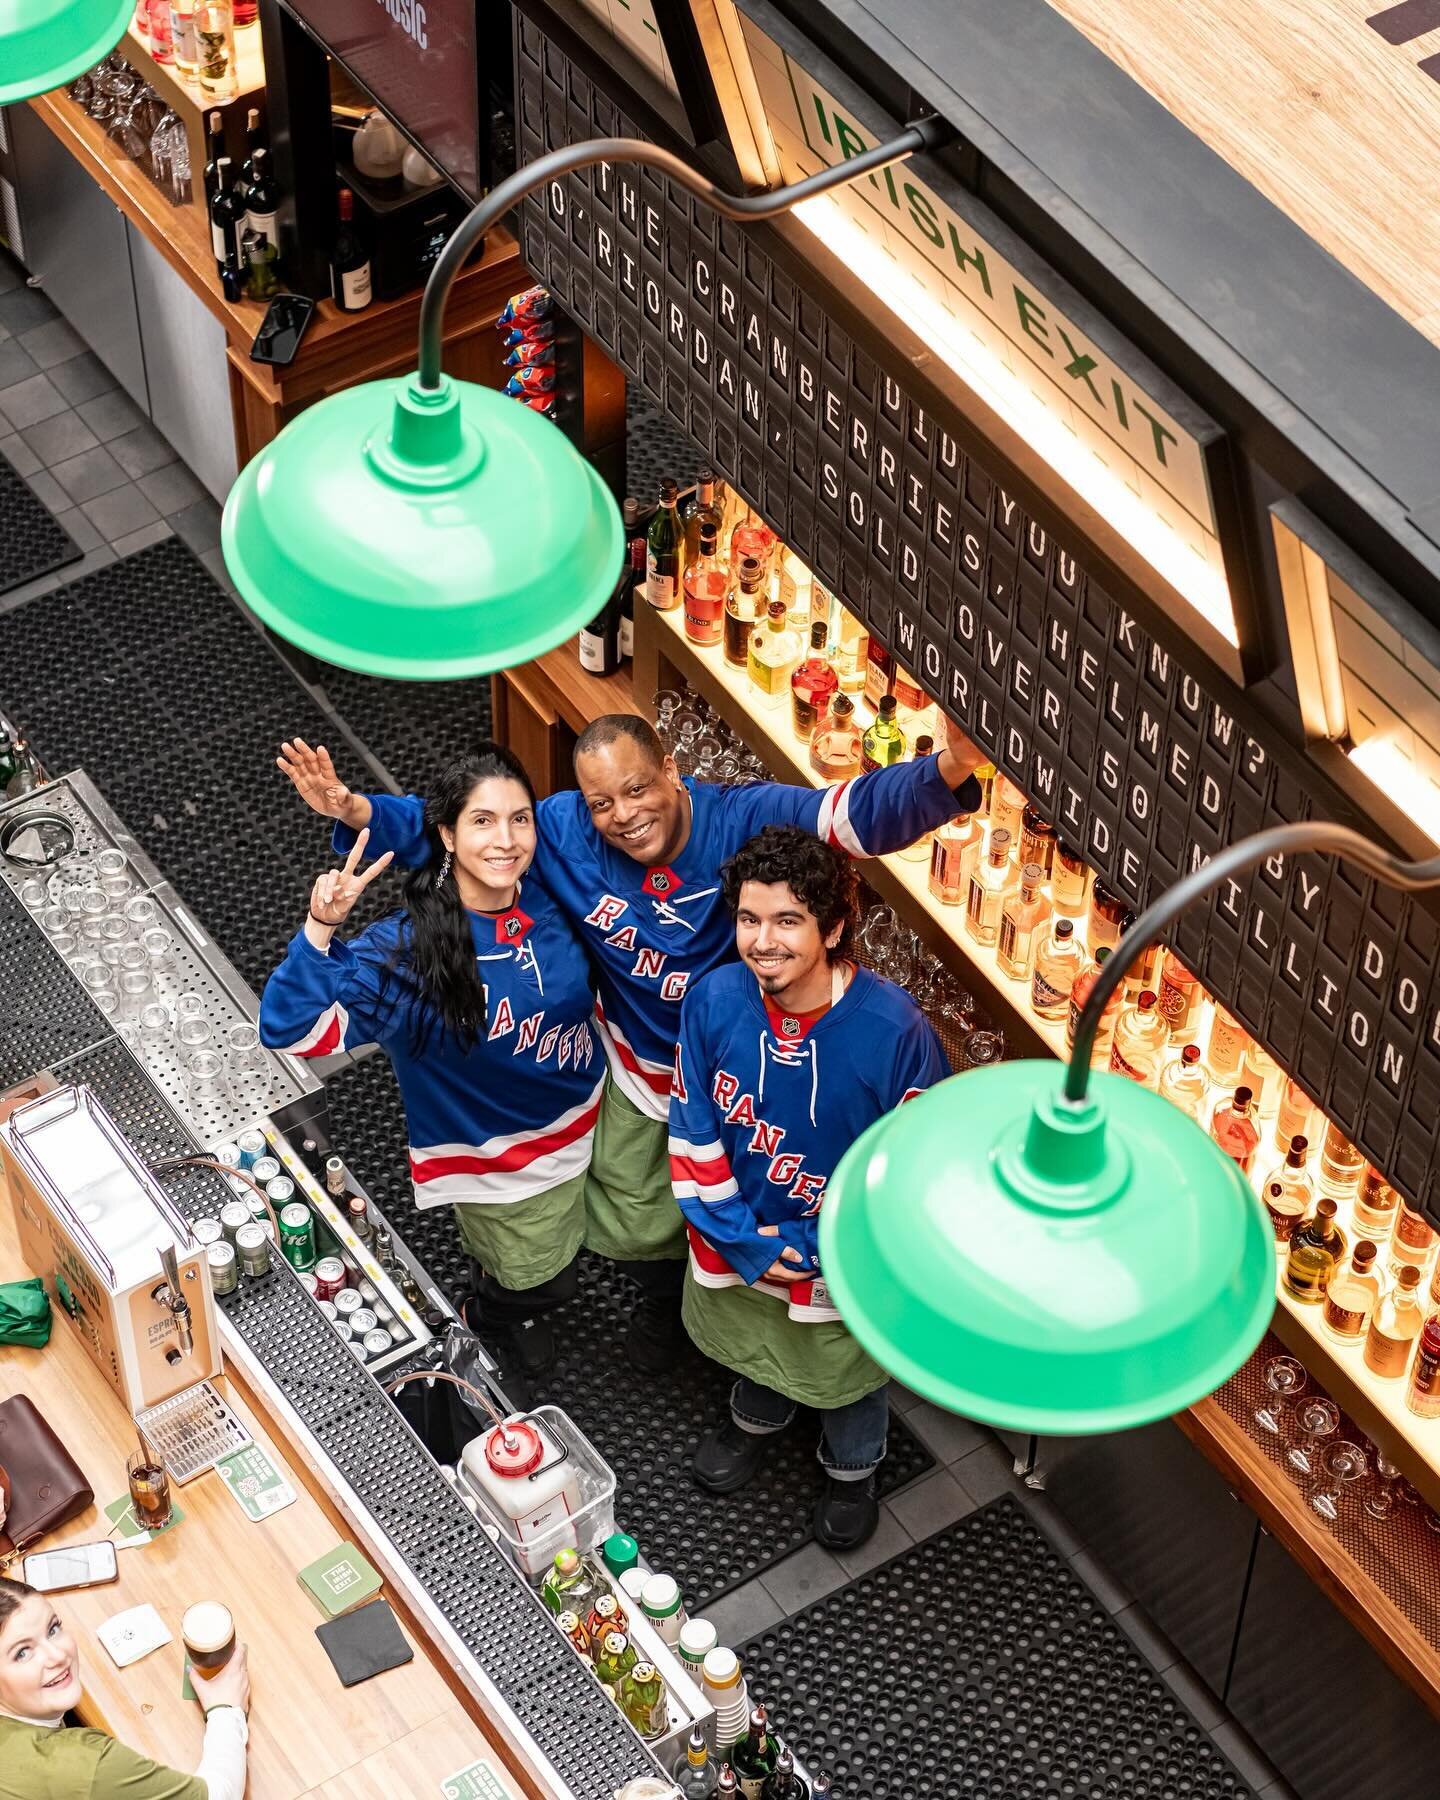 Are you ready for Game Day? Because we are. New York Rangers take on rivals New Jersey tonight at 7pm and we&rsquo;re screening all fixtures live, right through til Monday 15th. And as for who we&rsquo;re supporting? Well, you&rsquo;ll never guess.